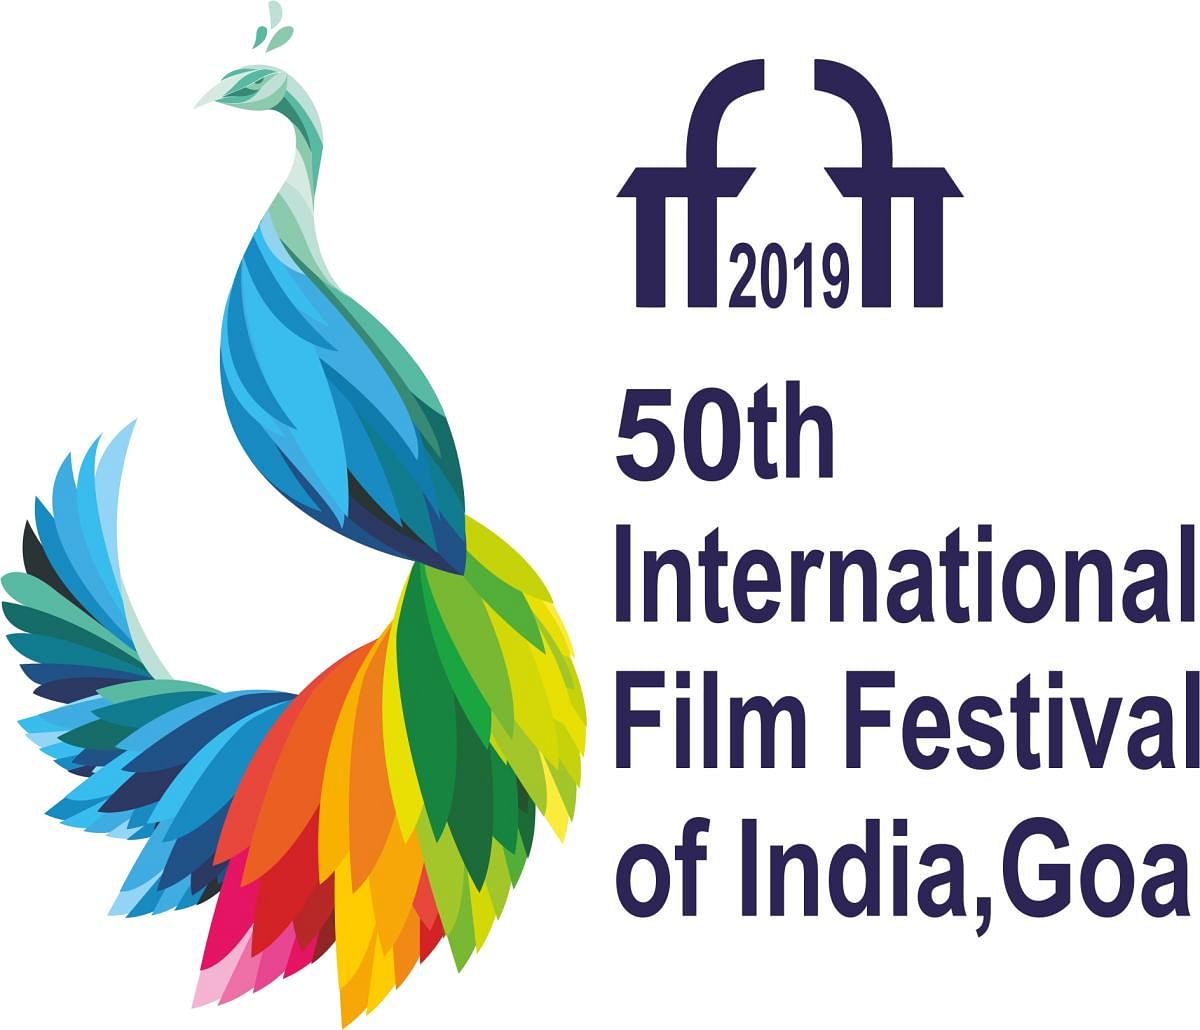 IFFI begins on November 20 and concludes on November 28.